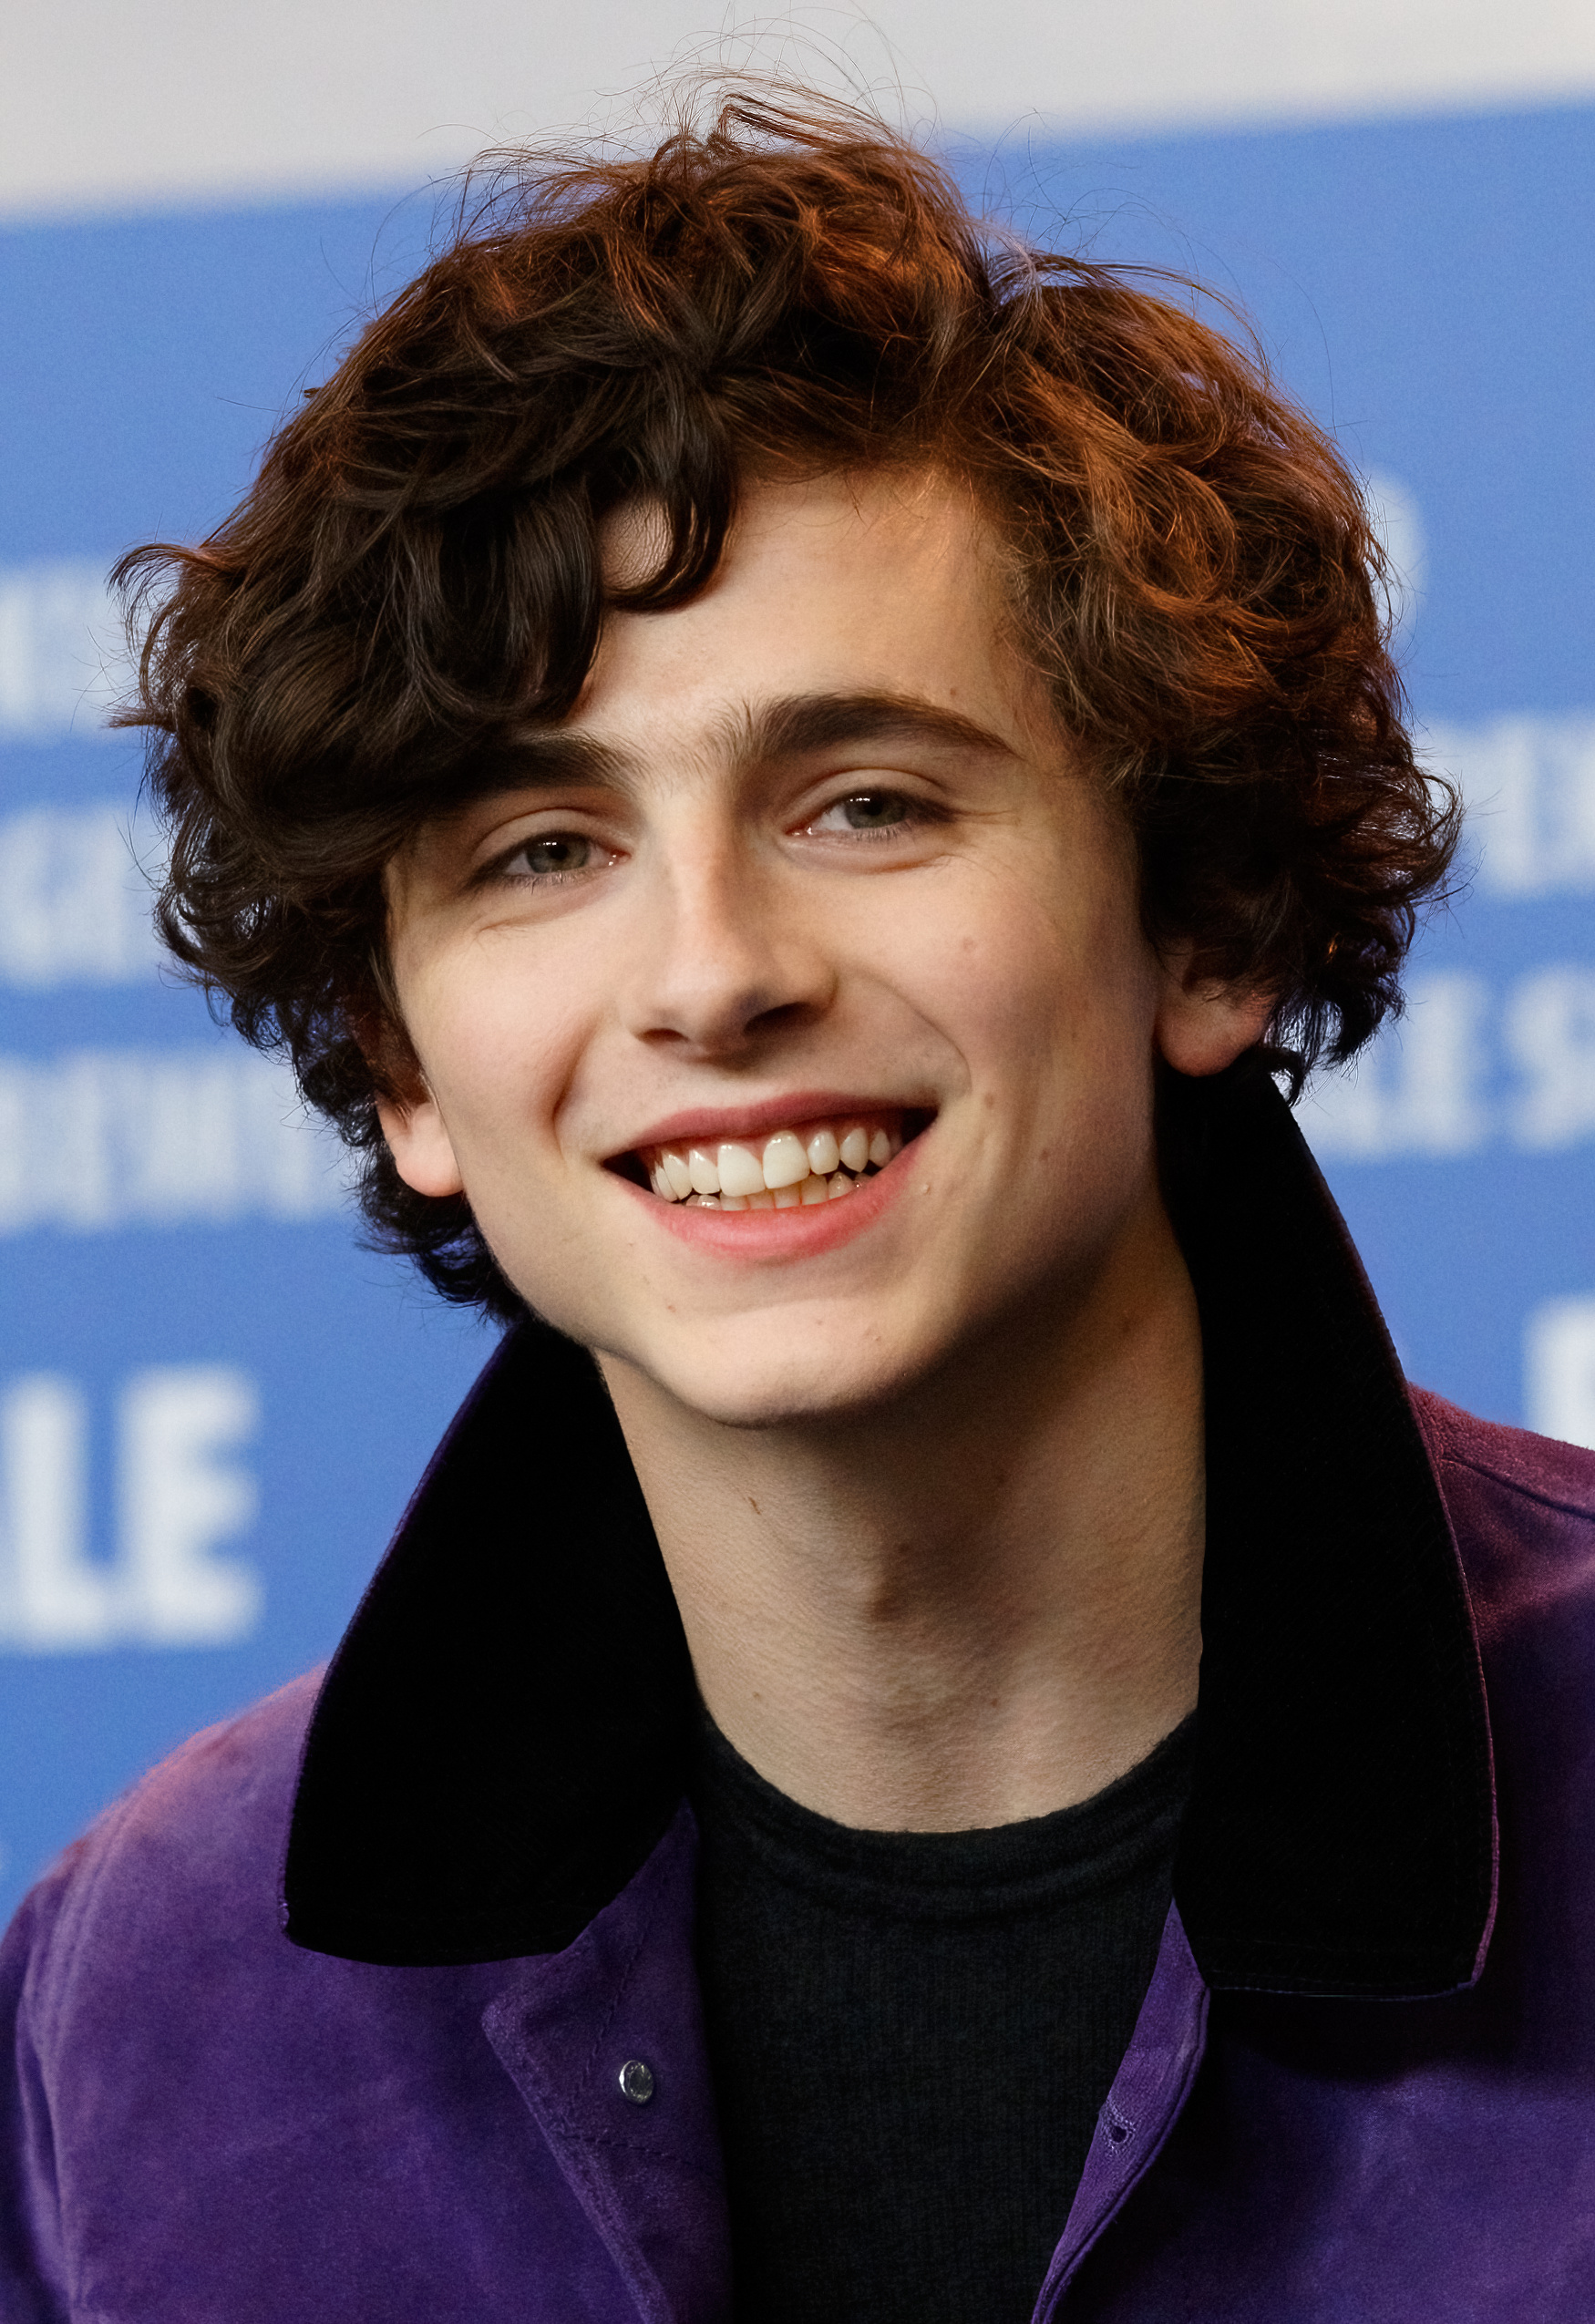 30 Interesting Things Most People Don’t Know About Timothée Chalamet